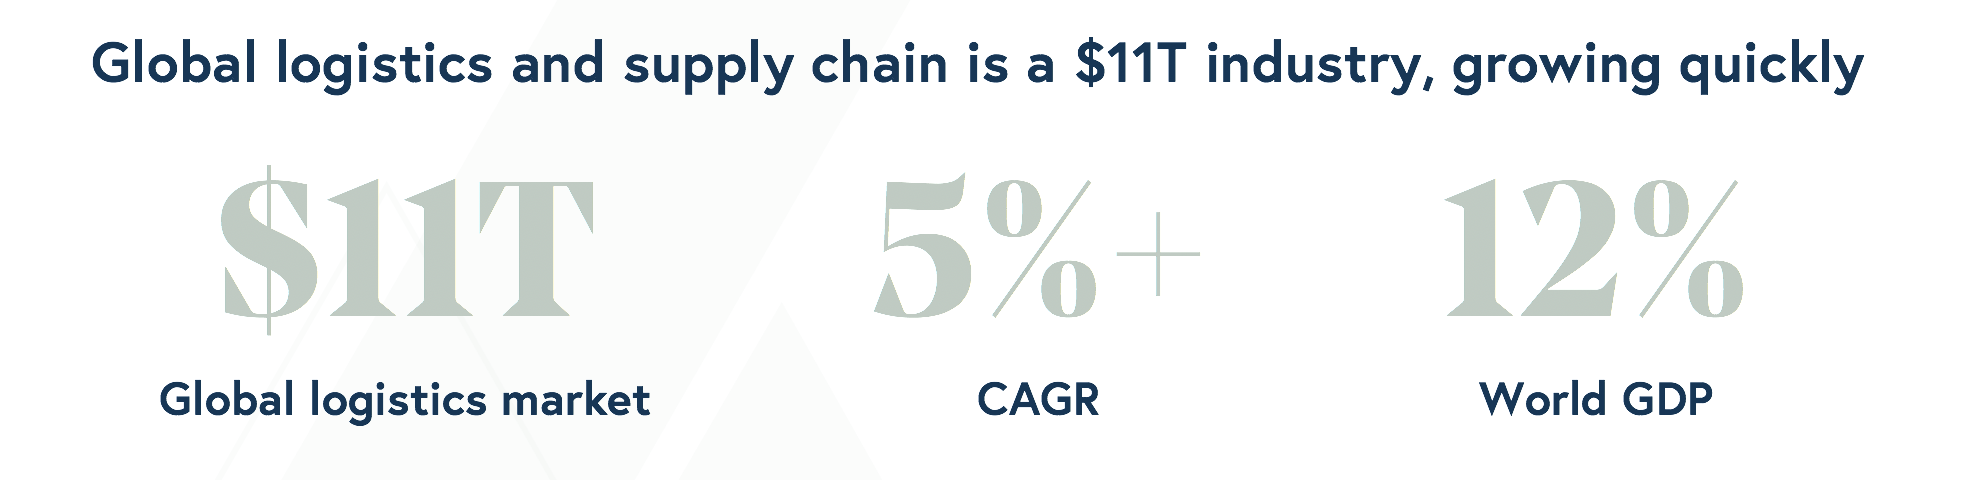 Global logistics and supply chain is $11T